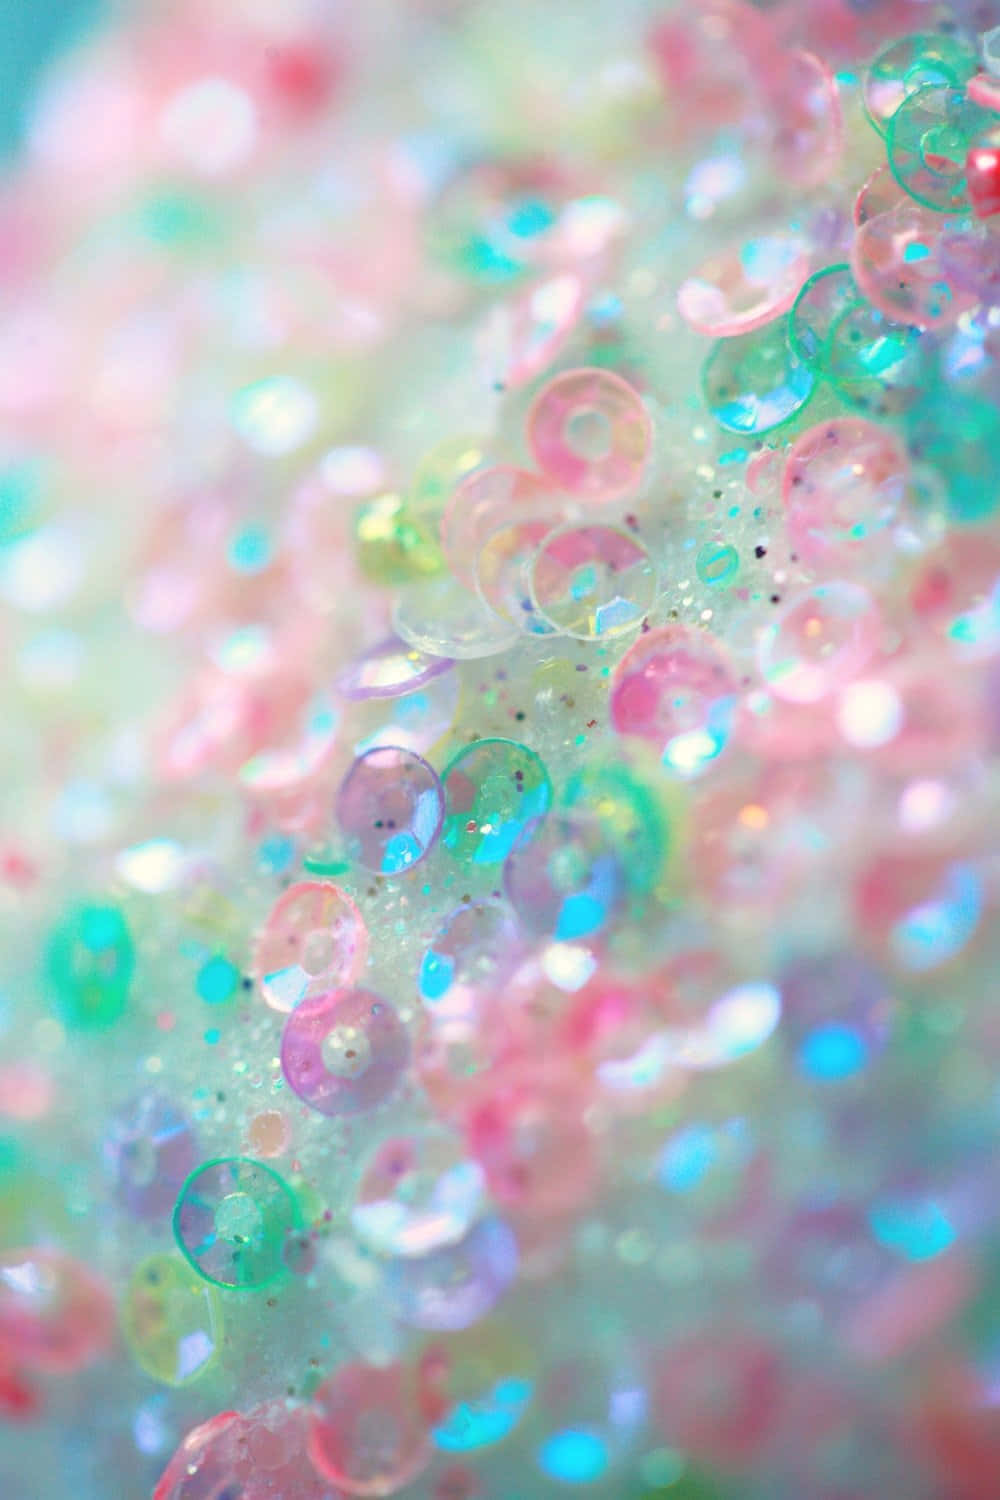 Get the sparkle in your life with this amazing background